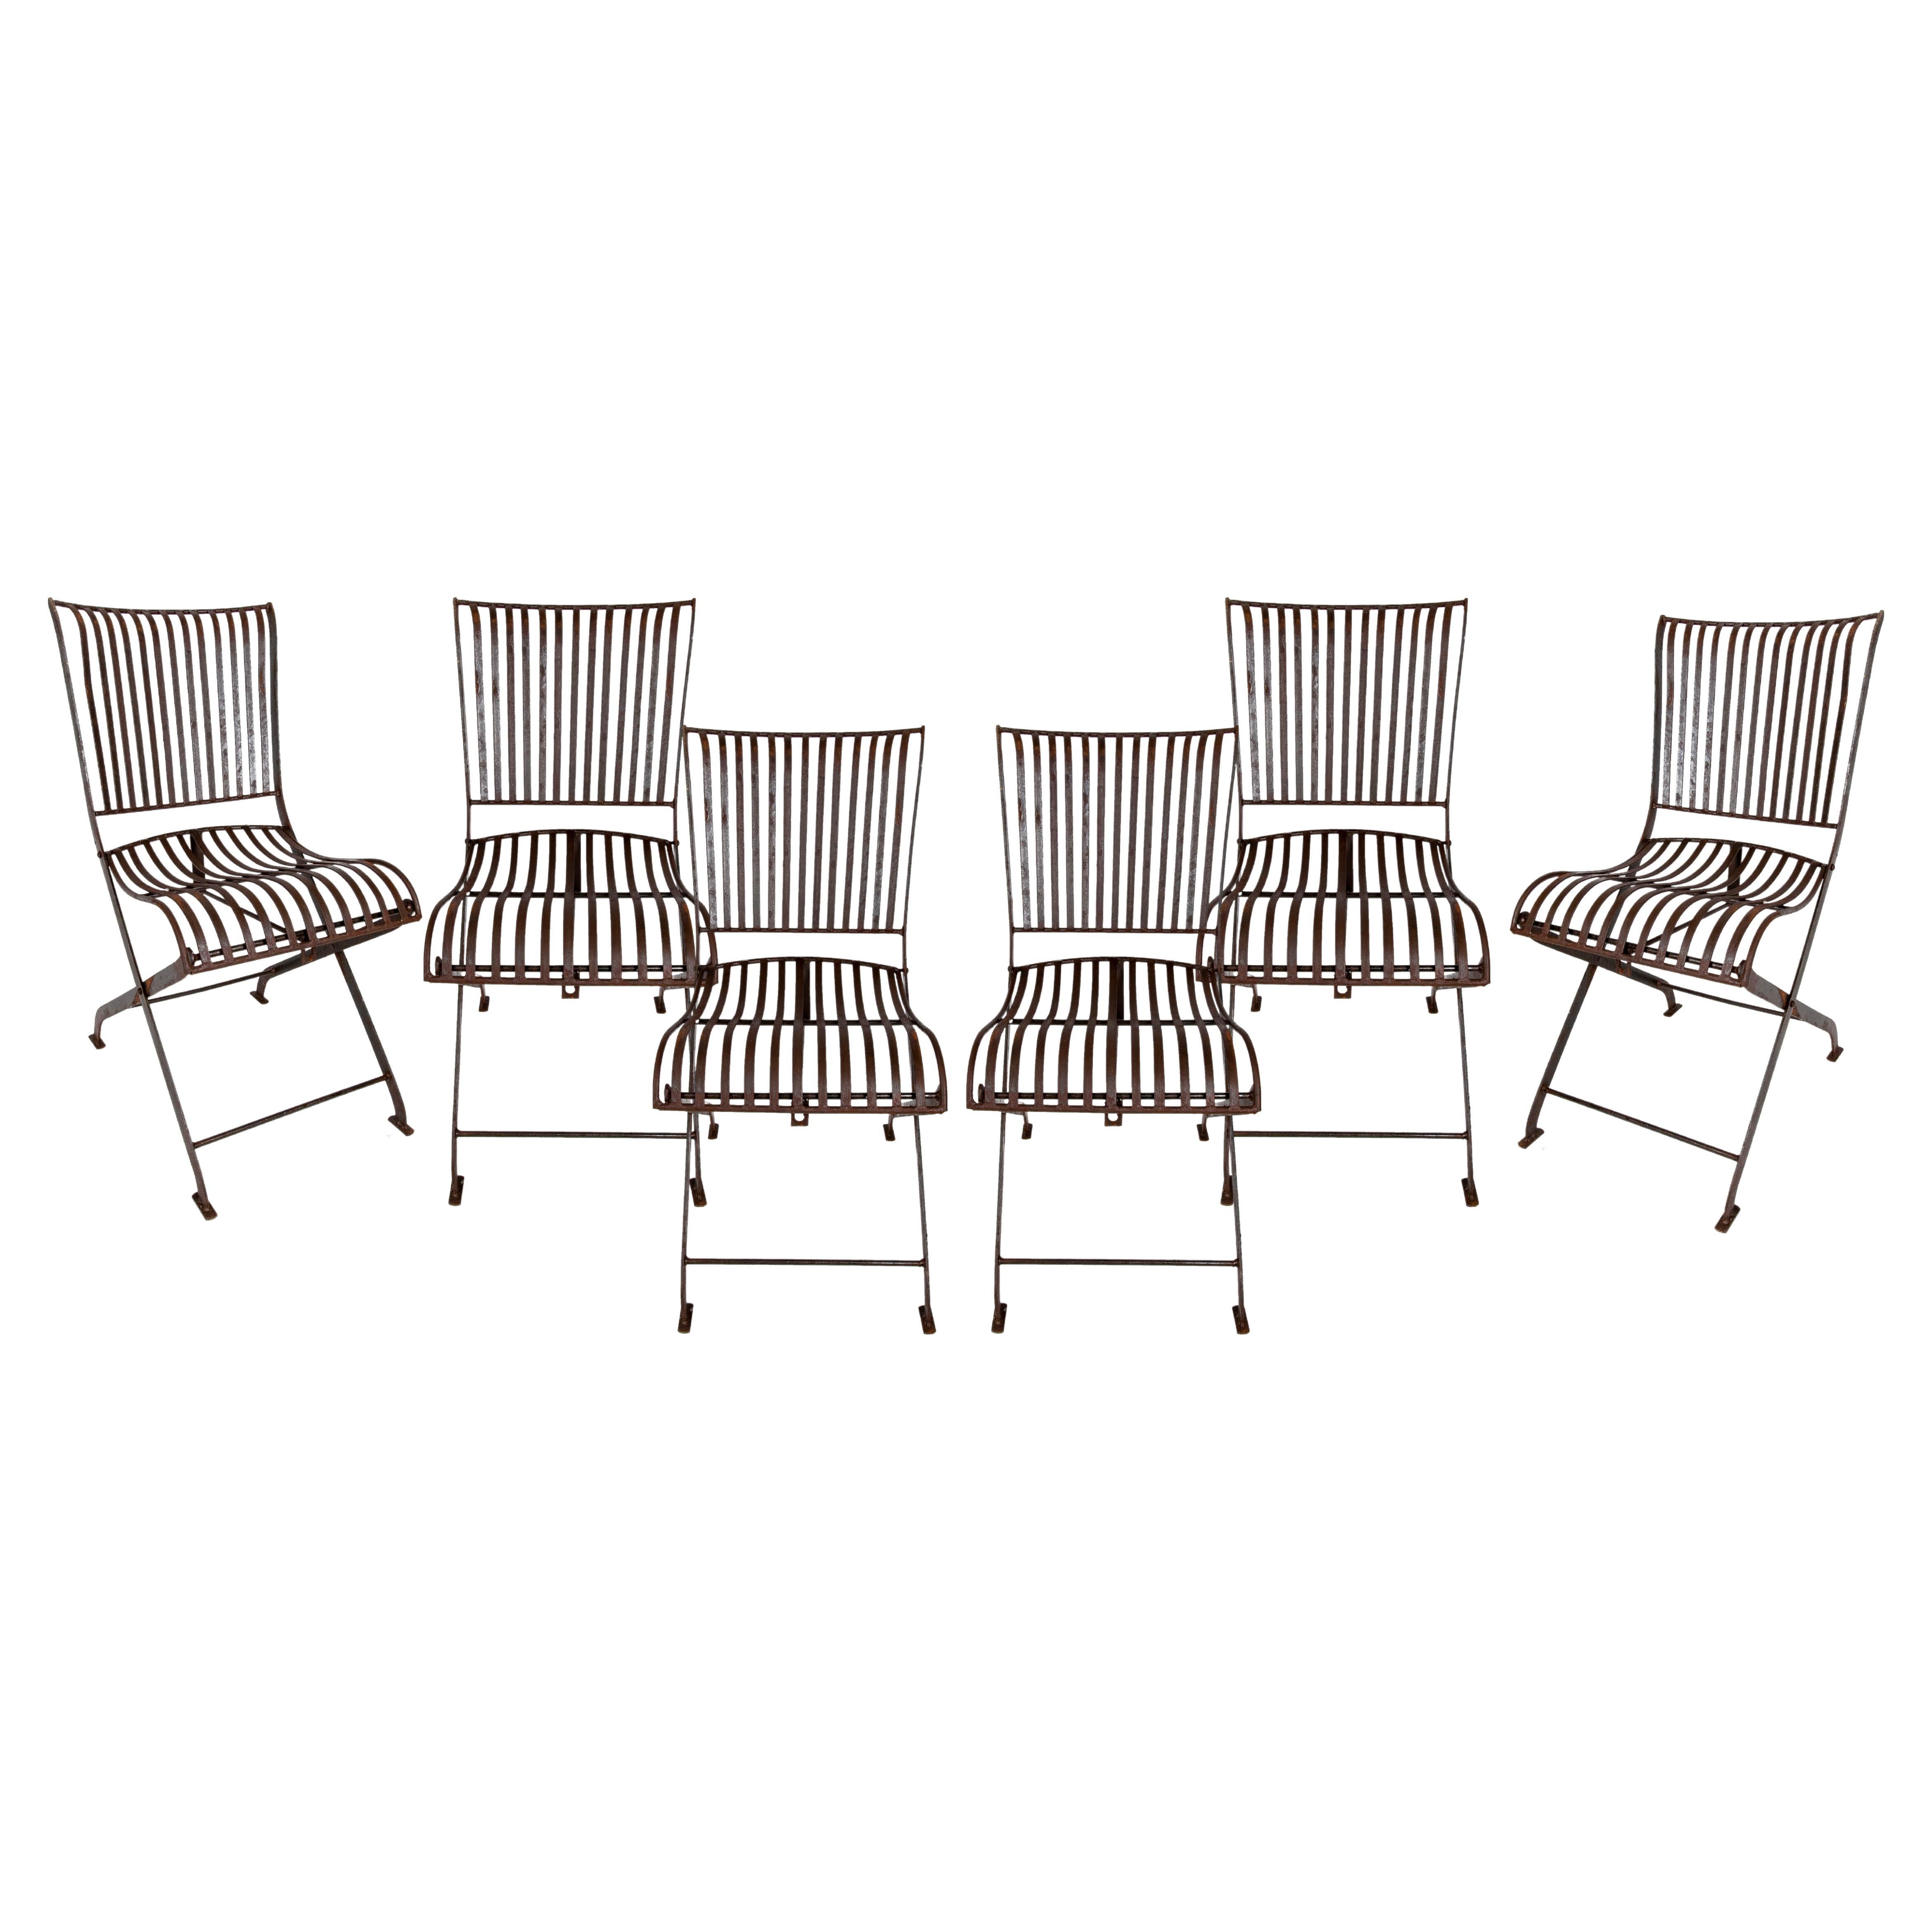 Set of Six Foldable Iron Garden Chairs For Sale